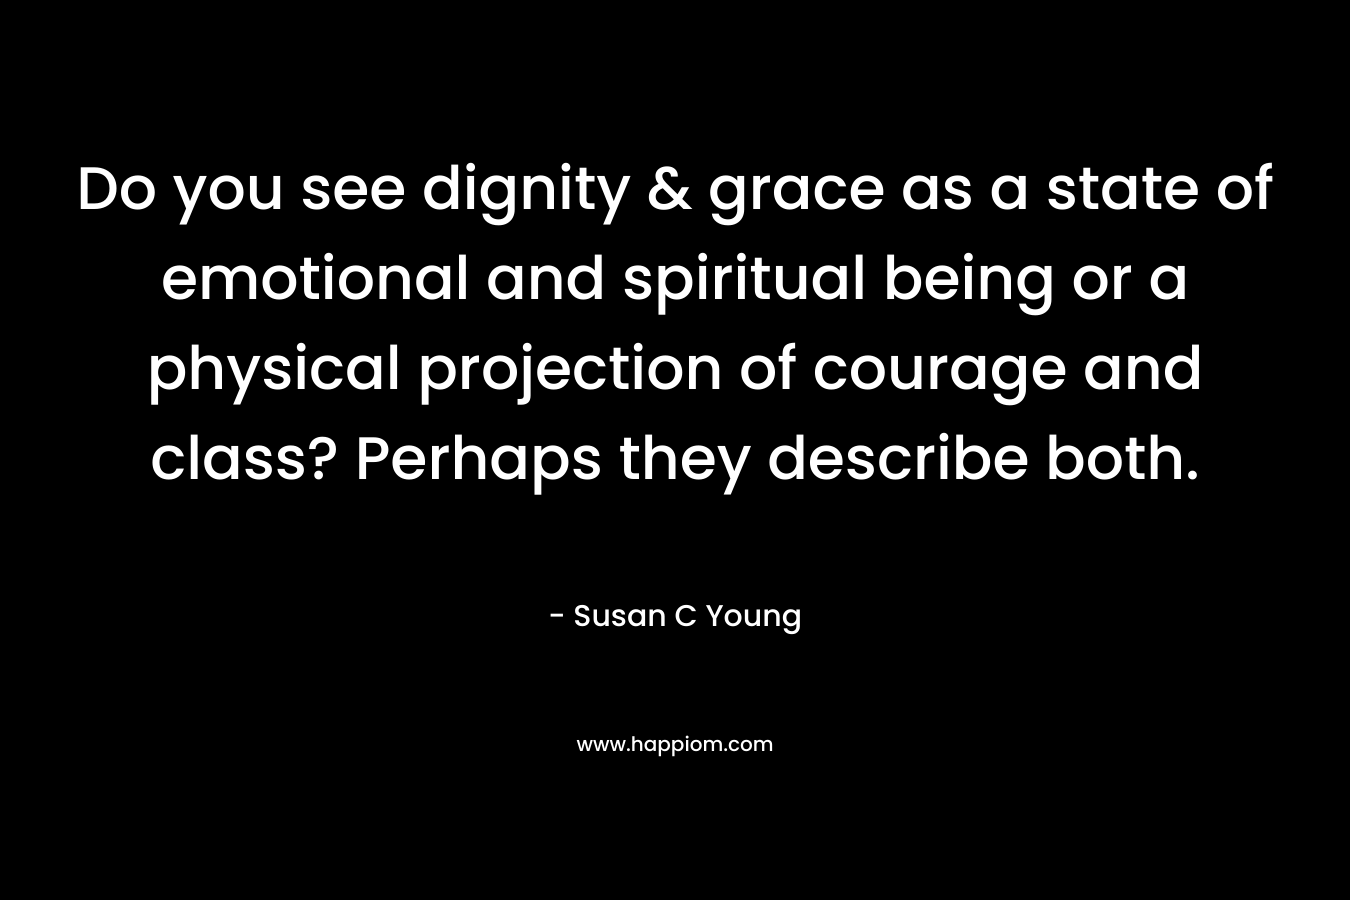 Do you see dignity & grace as a state of emotional and spiritual being or a physical projection of courage and class? Perhaps they describe both. – Susan C Young